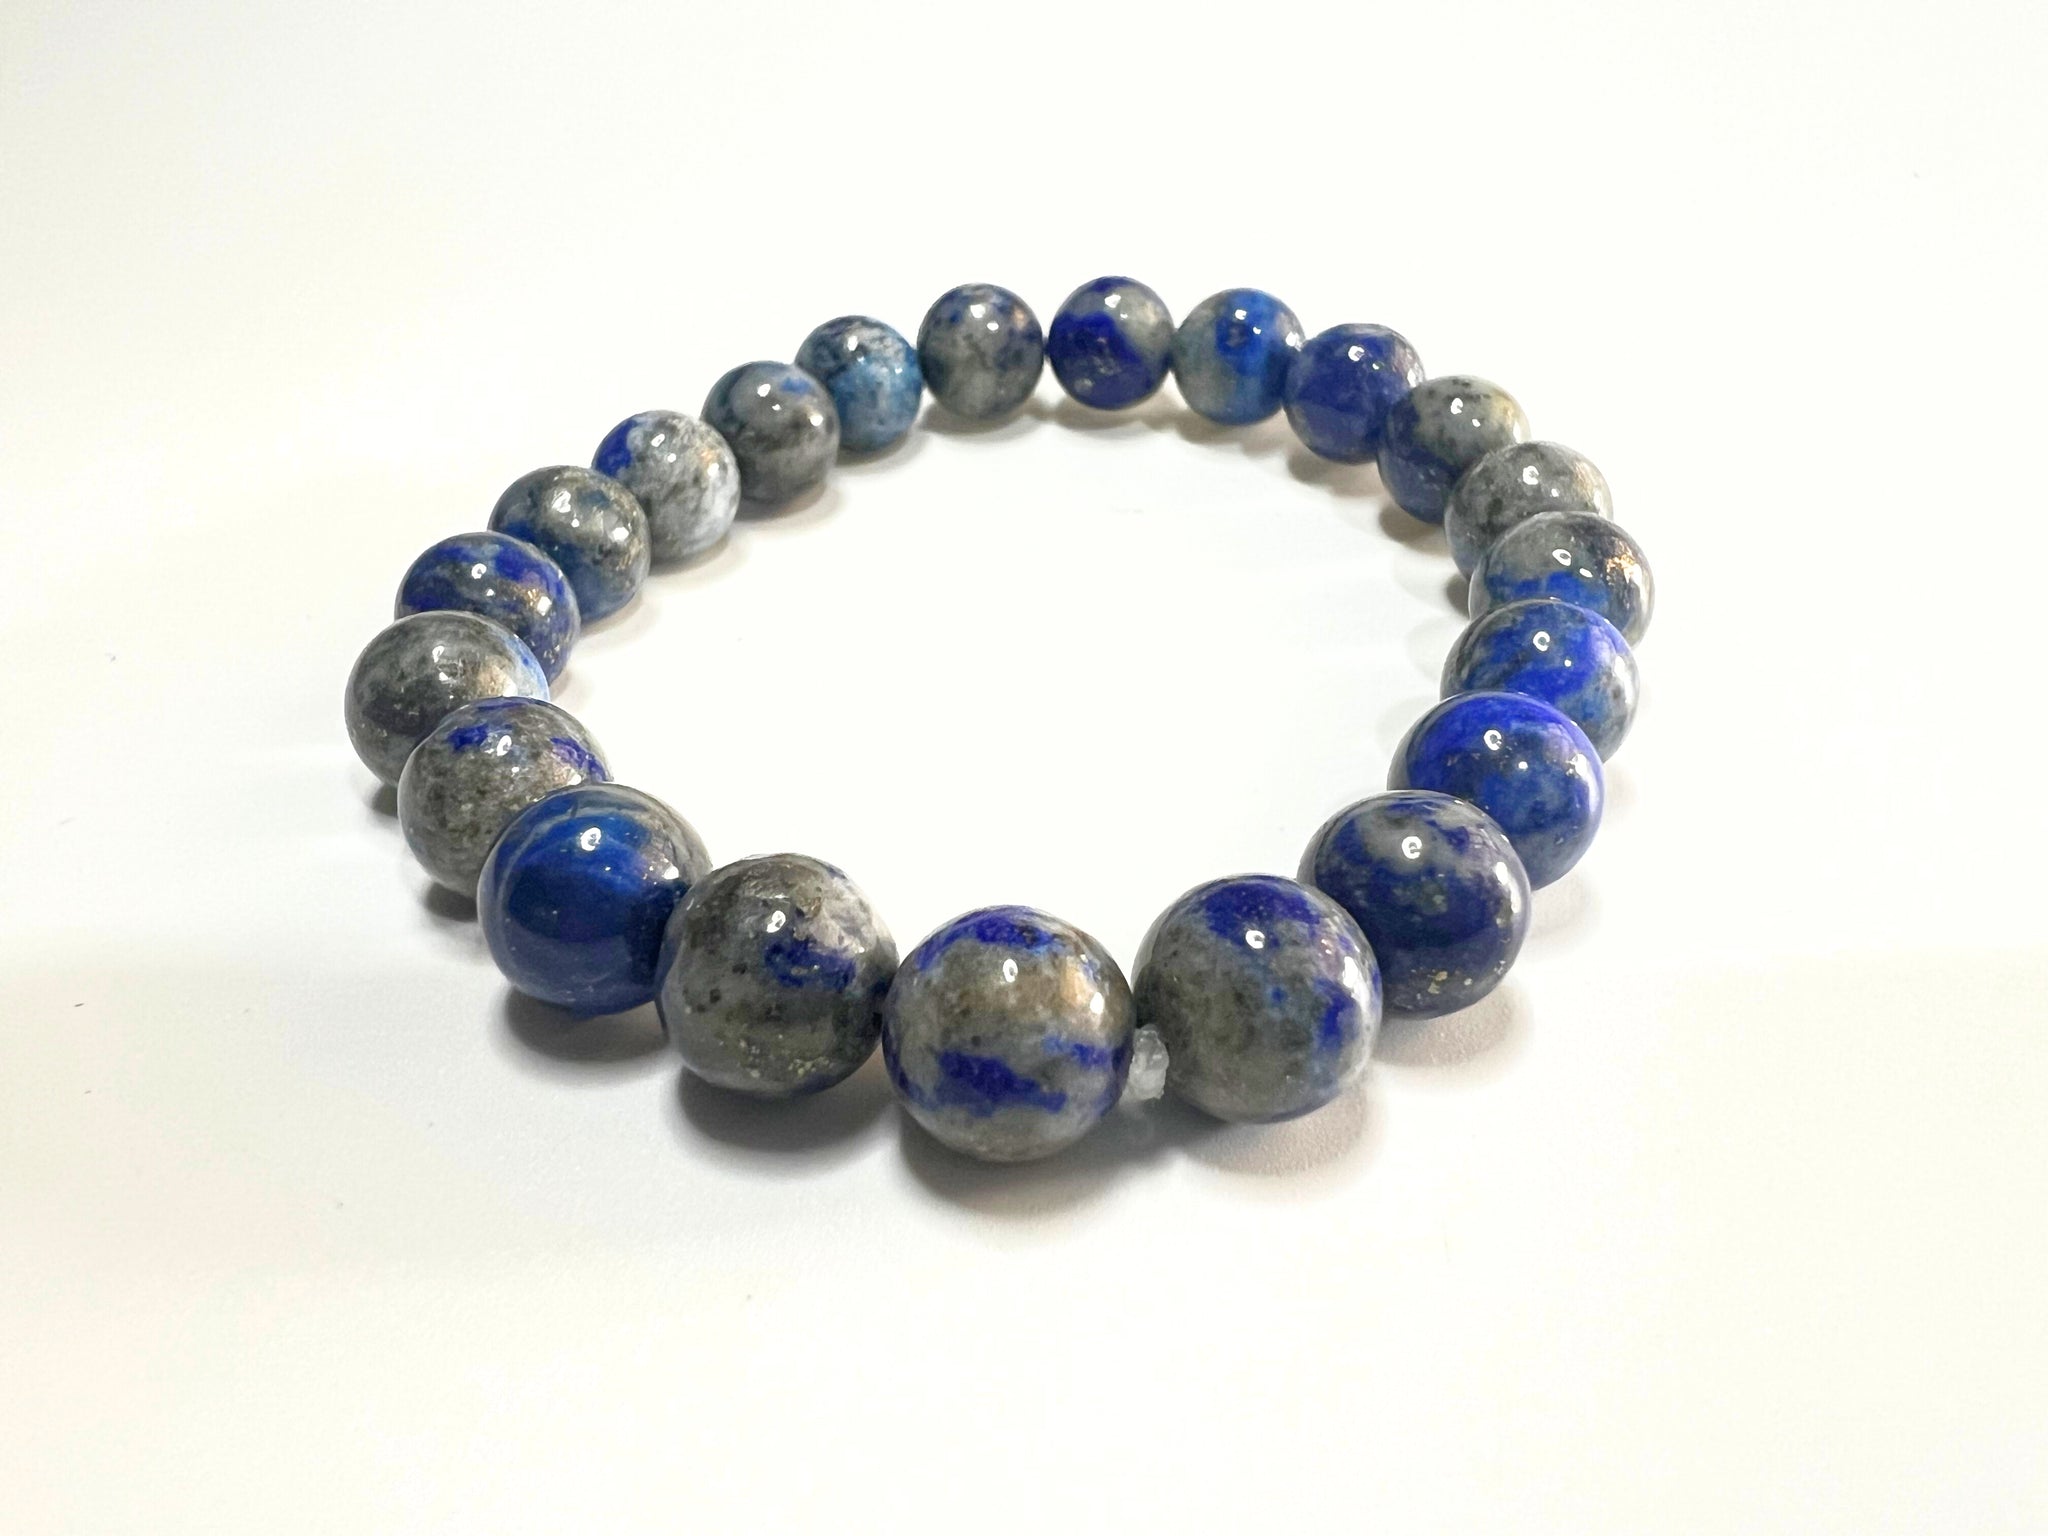 CRYSTAL LAPIS LAZULI  BRACELET CERTIFIED BLUE COLOUR MEDITATION HEALING ACCESSORY HOME OFFICE GIFT JEWELLERY